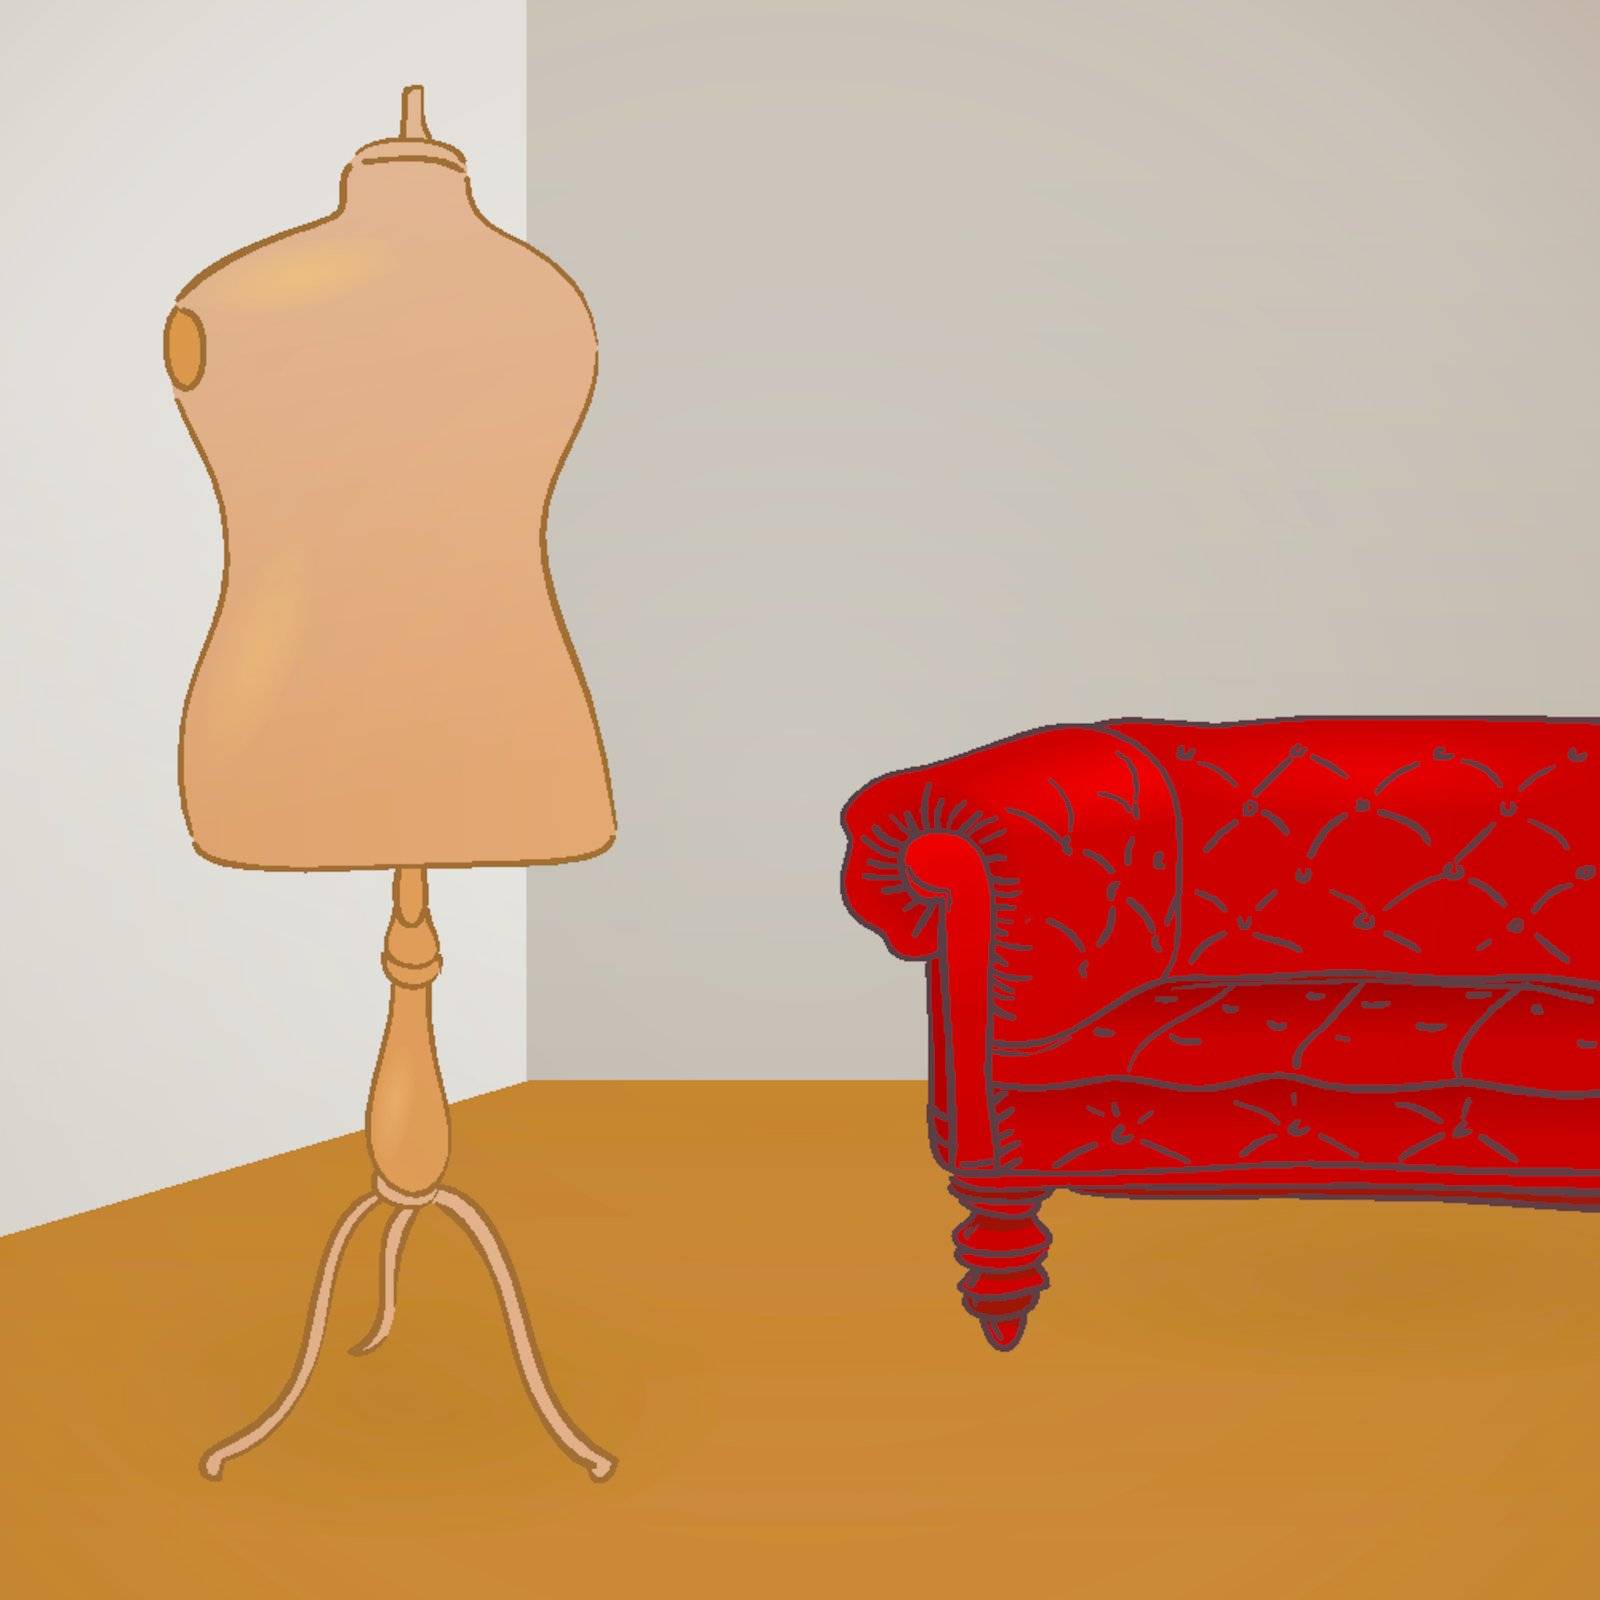 Clothing Mannequin Illustration by zager